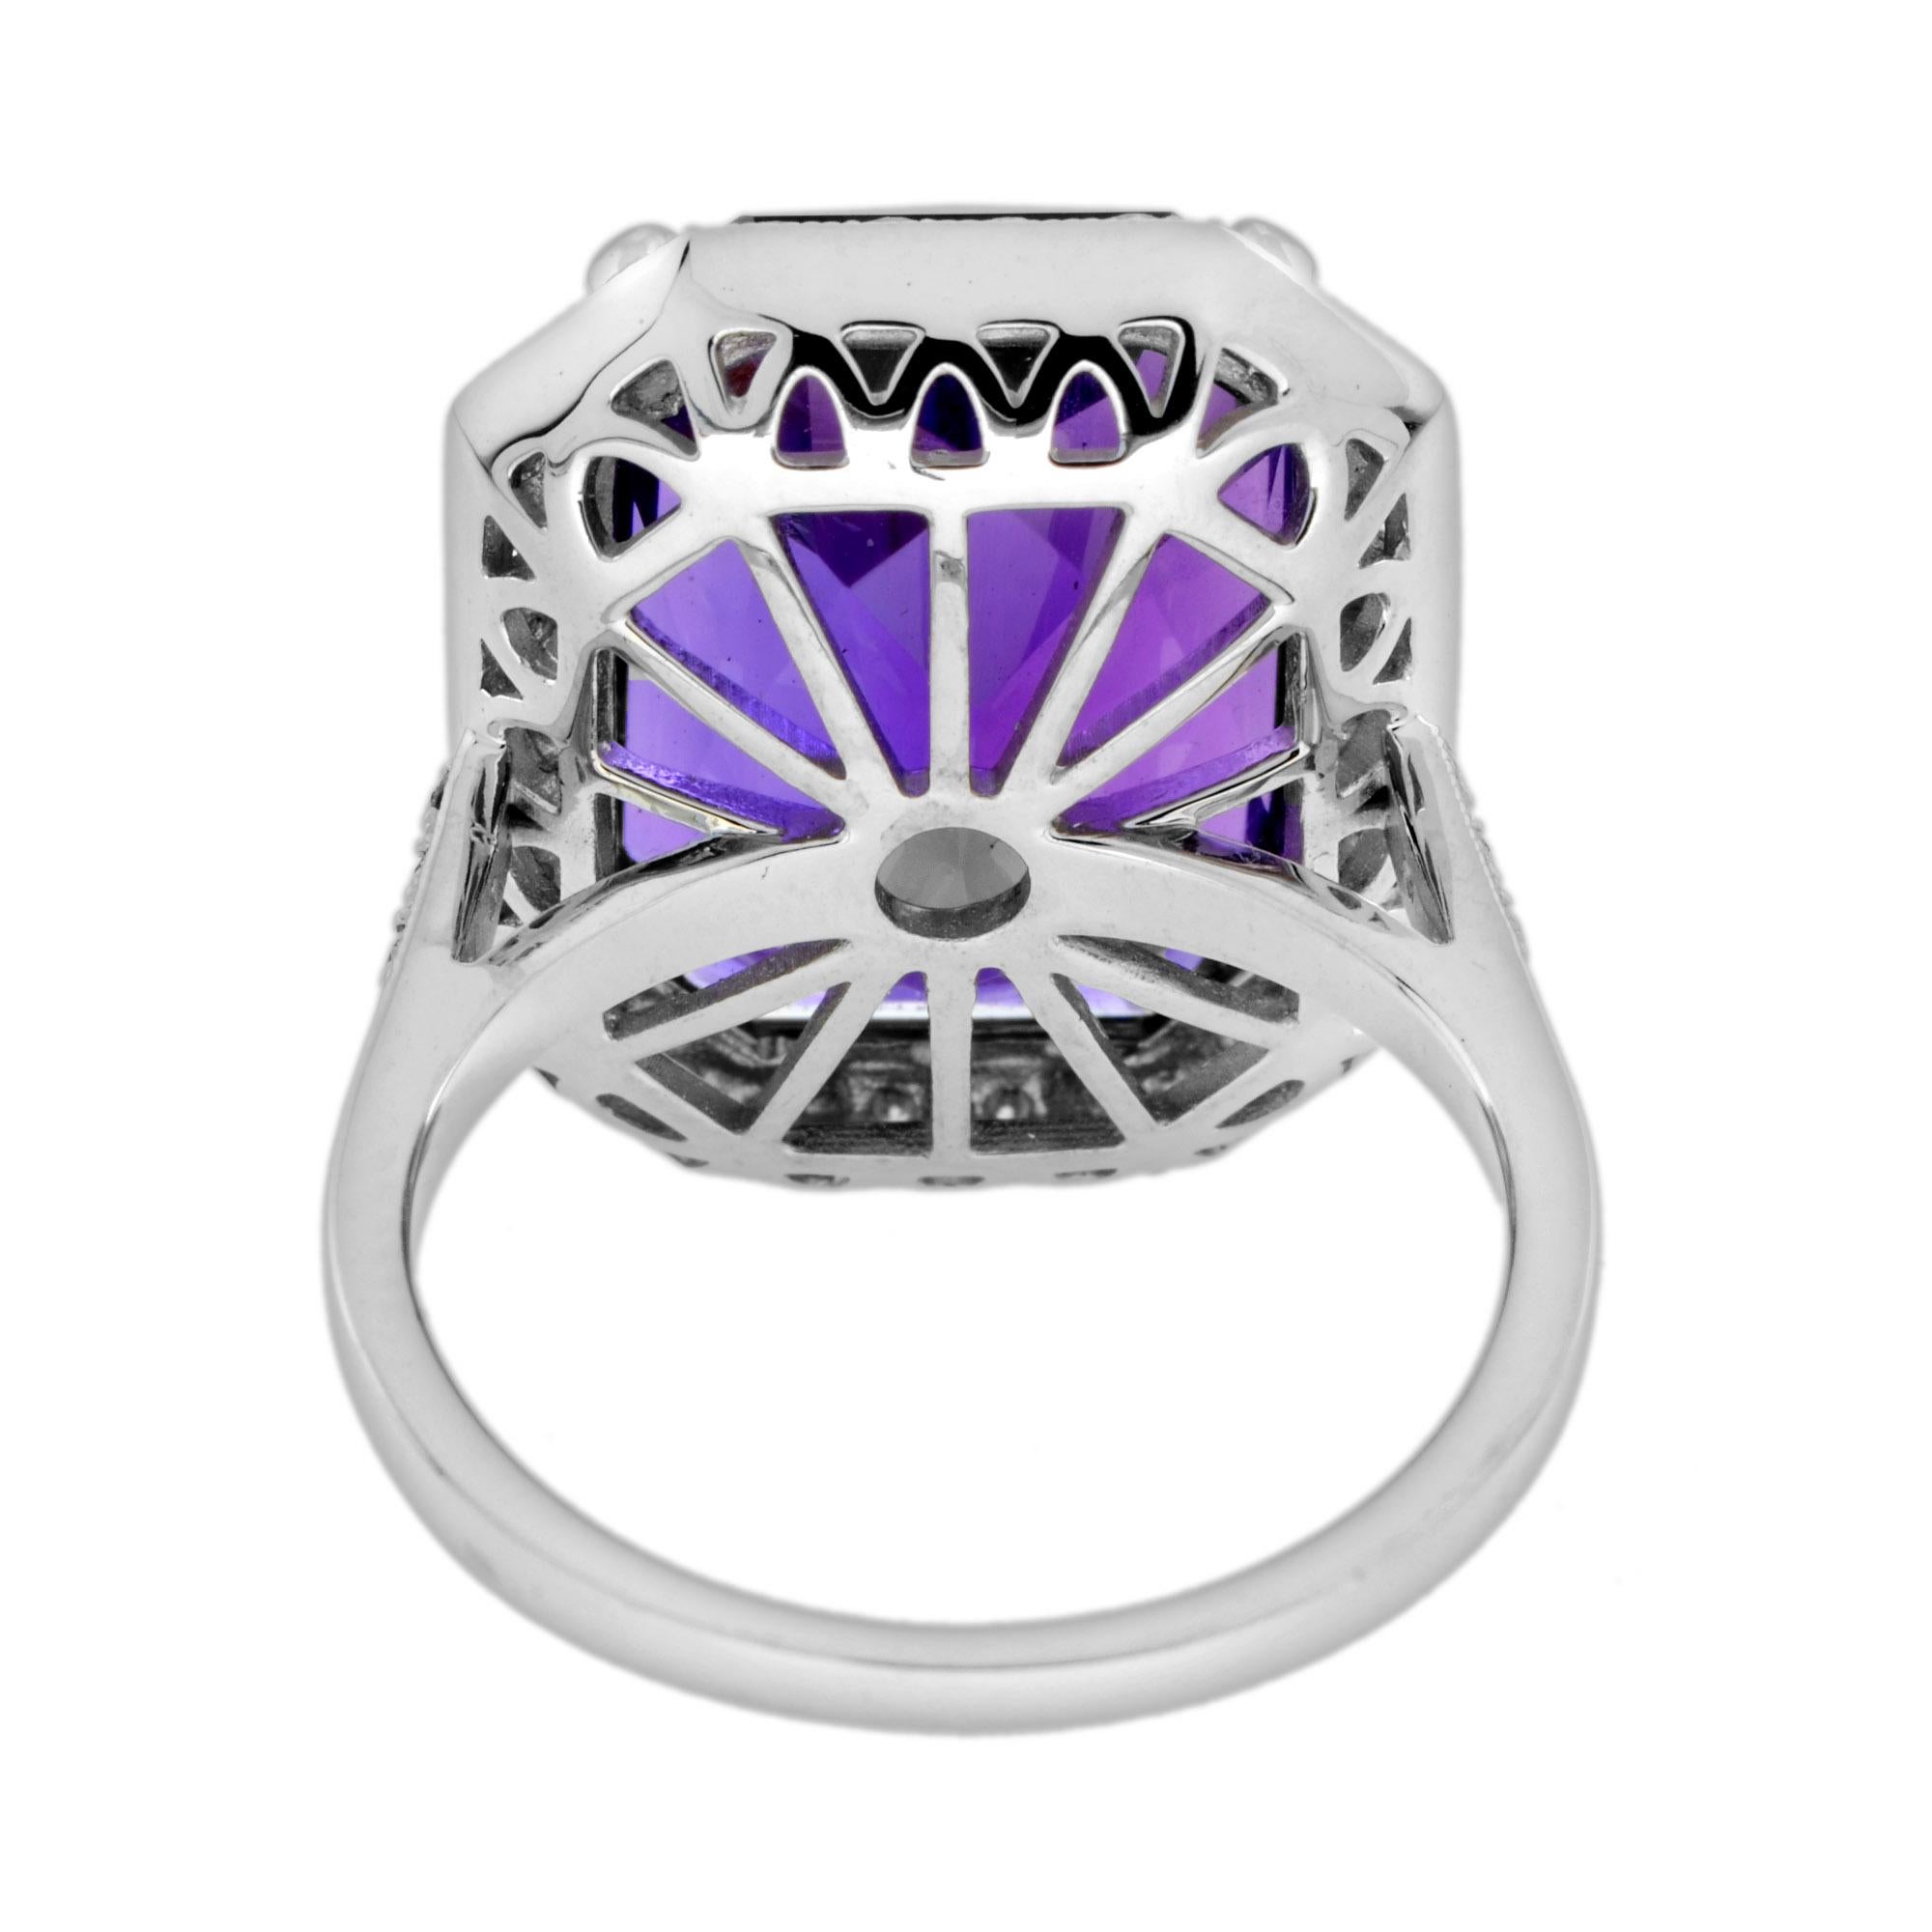 Certified 11.75 Ct. Amethyst and Diamond Halo Art Deco Style Ring in 14K Gold 1